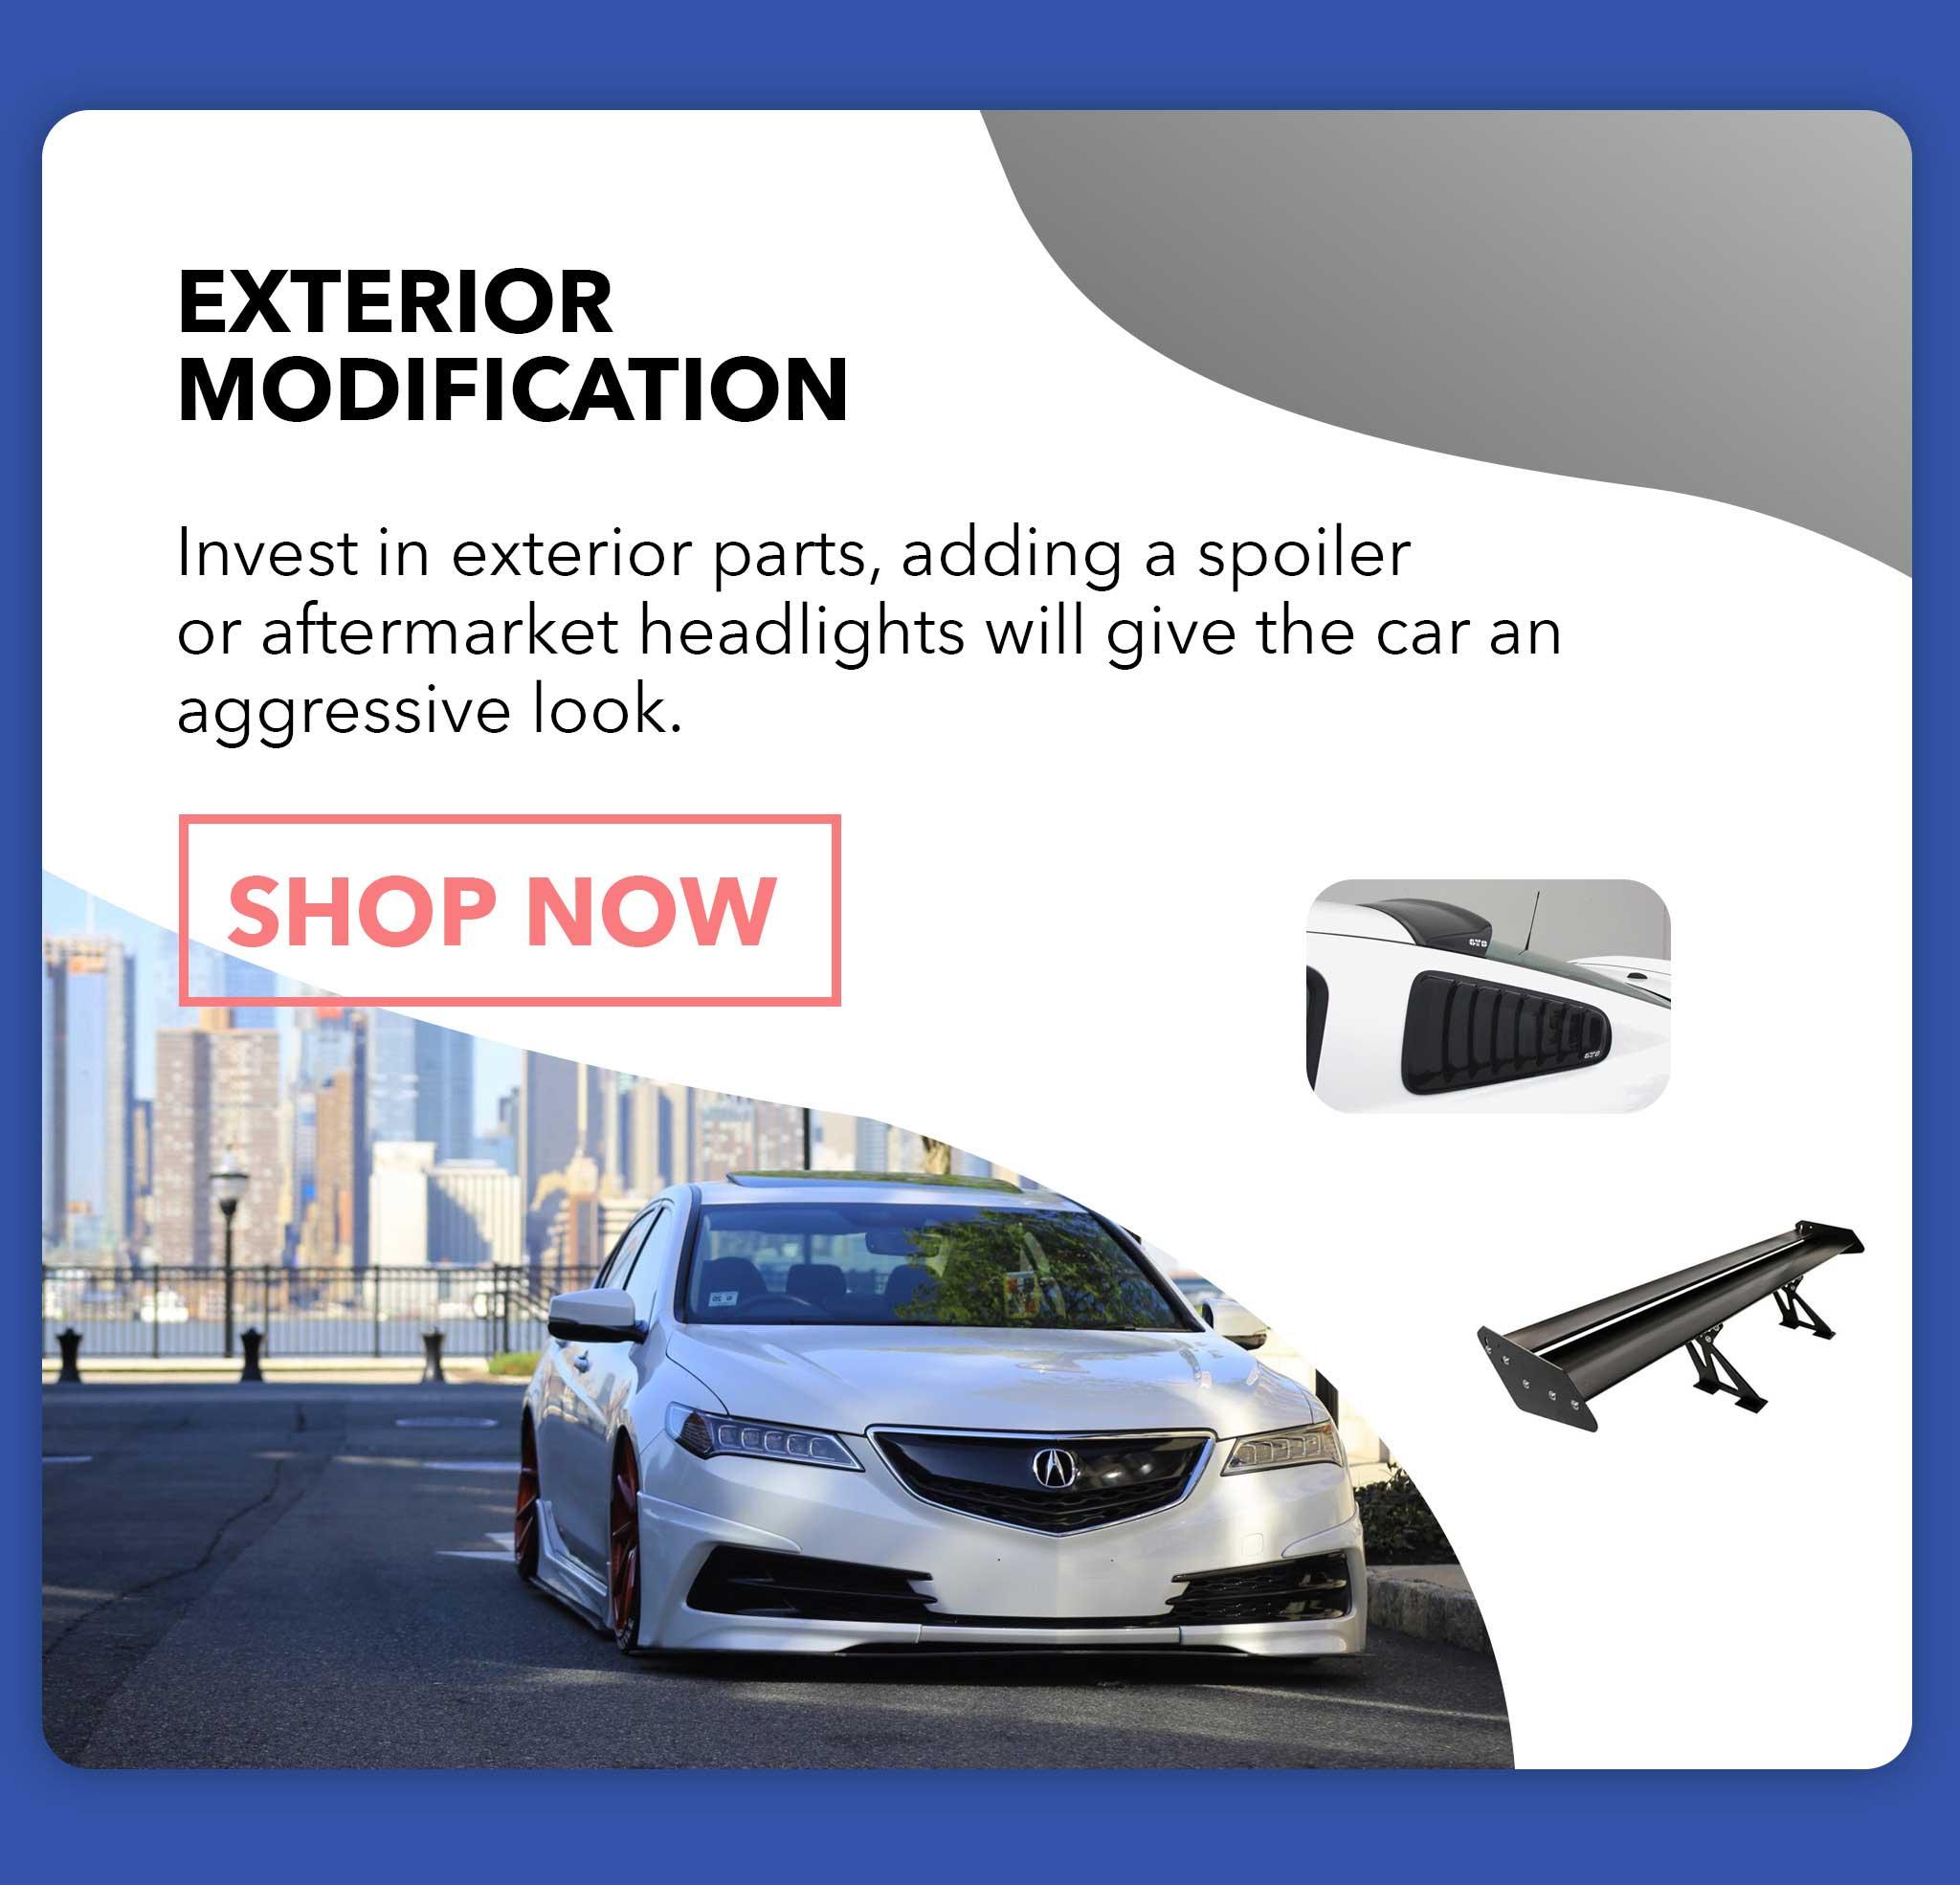 Invest in Exterior parts, adding a spoiler or aftermarket headlights will give the car an aggressive look.